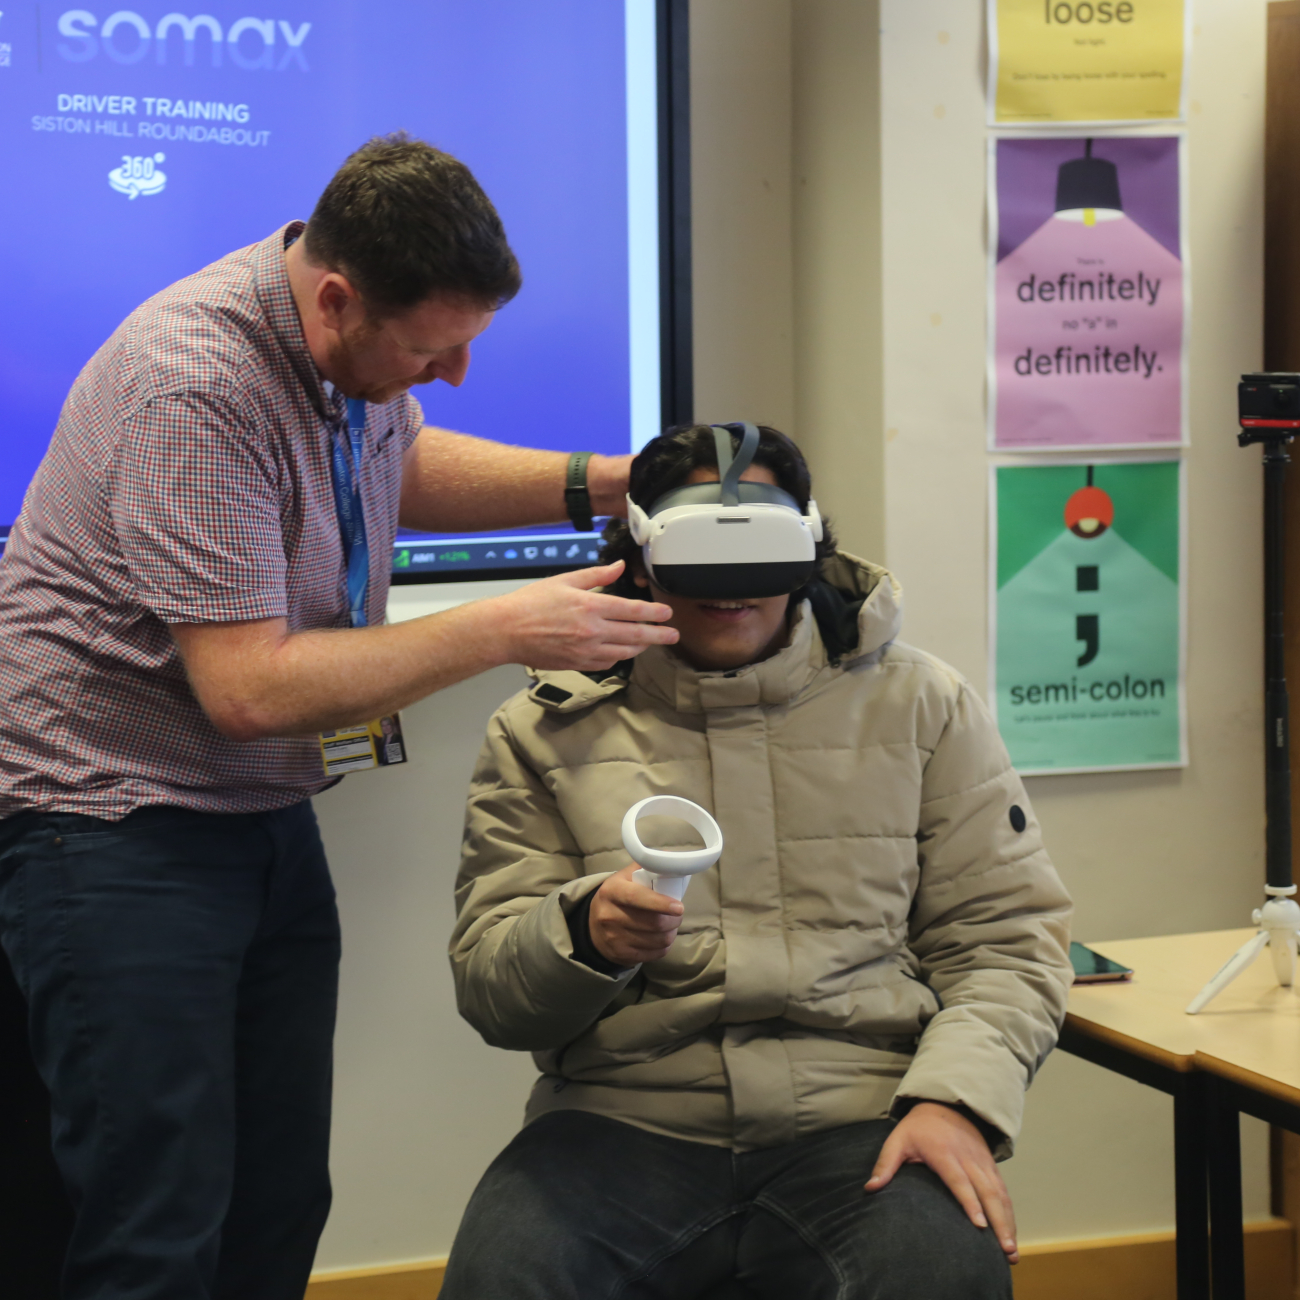 Learner having a VR headset fitted